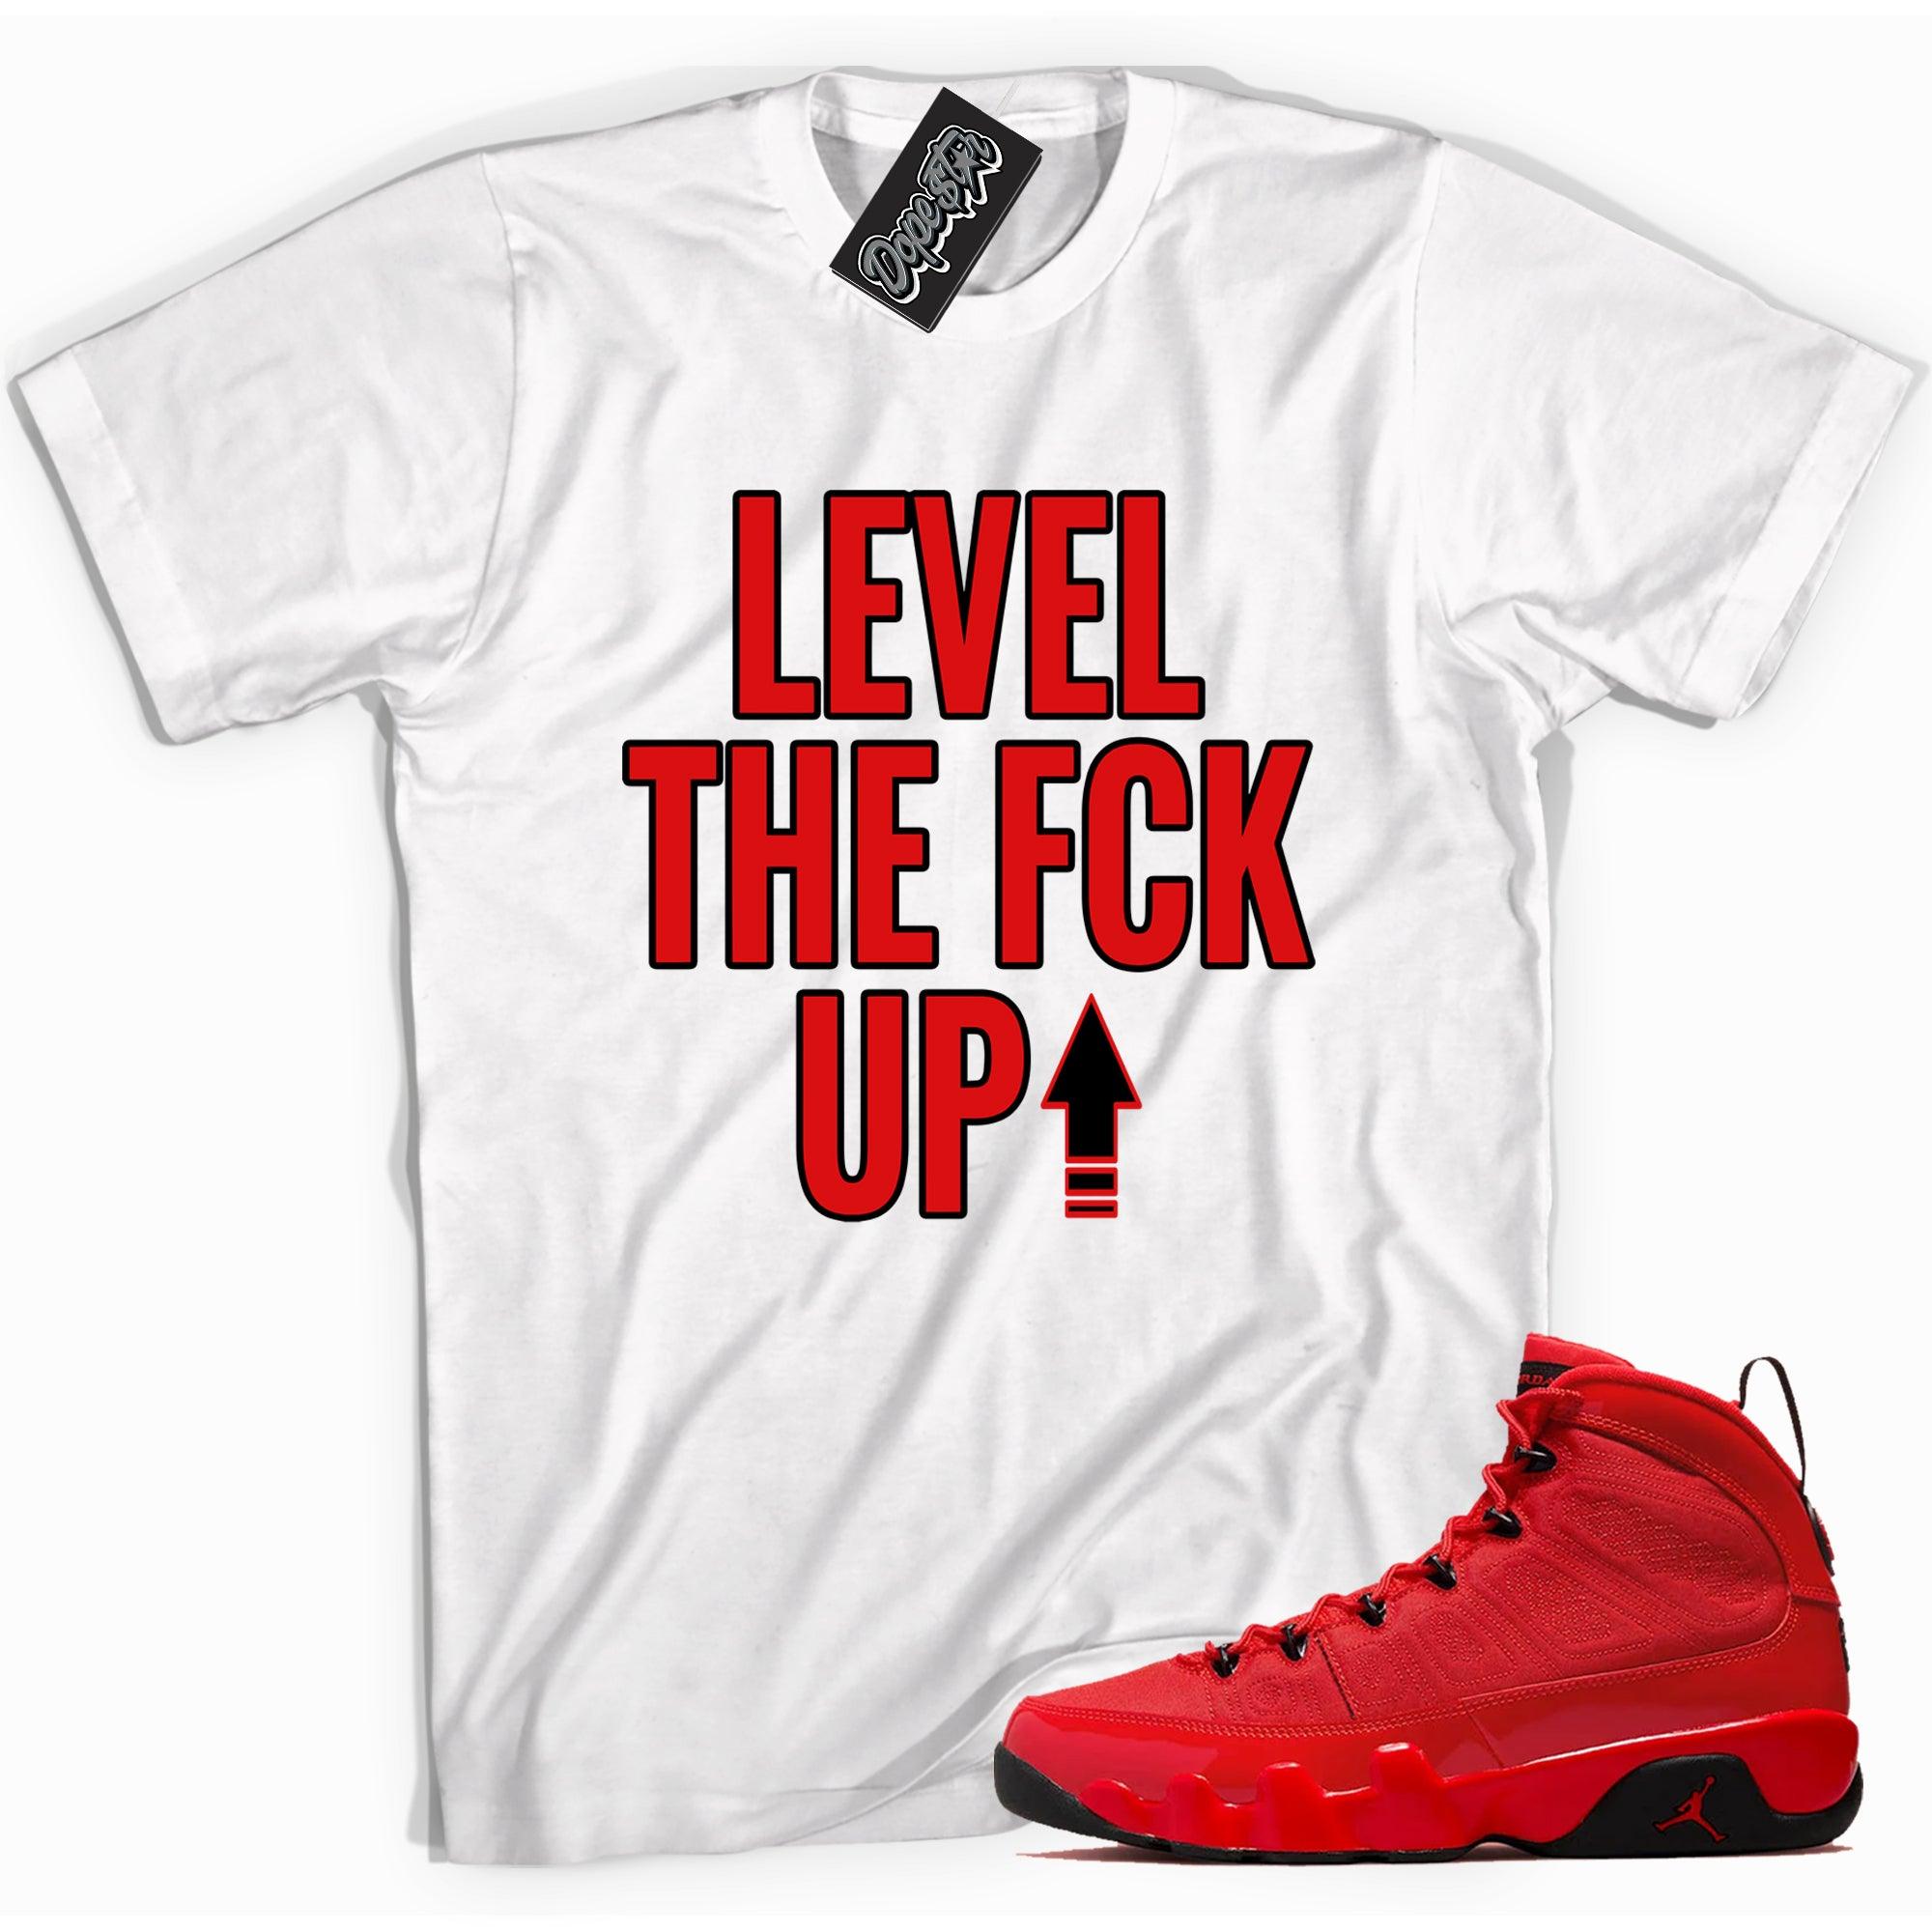 Cool white graphic tee with 'Level Up' print, that perfectly matches Air Jordan 9 Retro Chile Red sneakers.